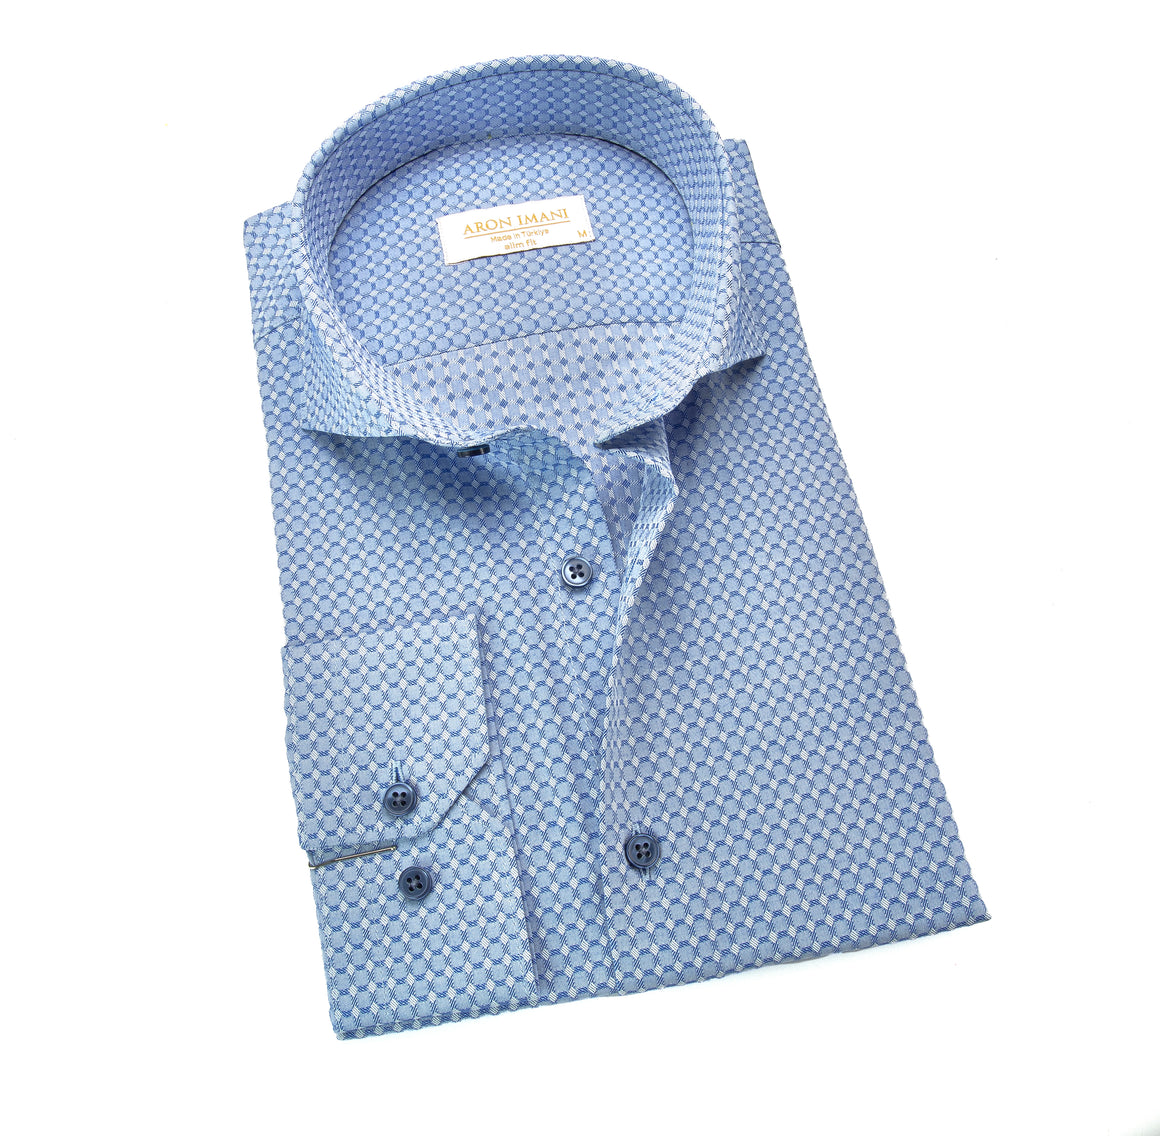 Discover elegance with the ARON IMANI European Made Men's Button Down Dress Shirt in a sleek, slim fit | 108 Blue